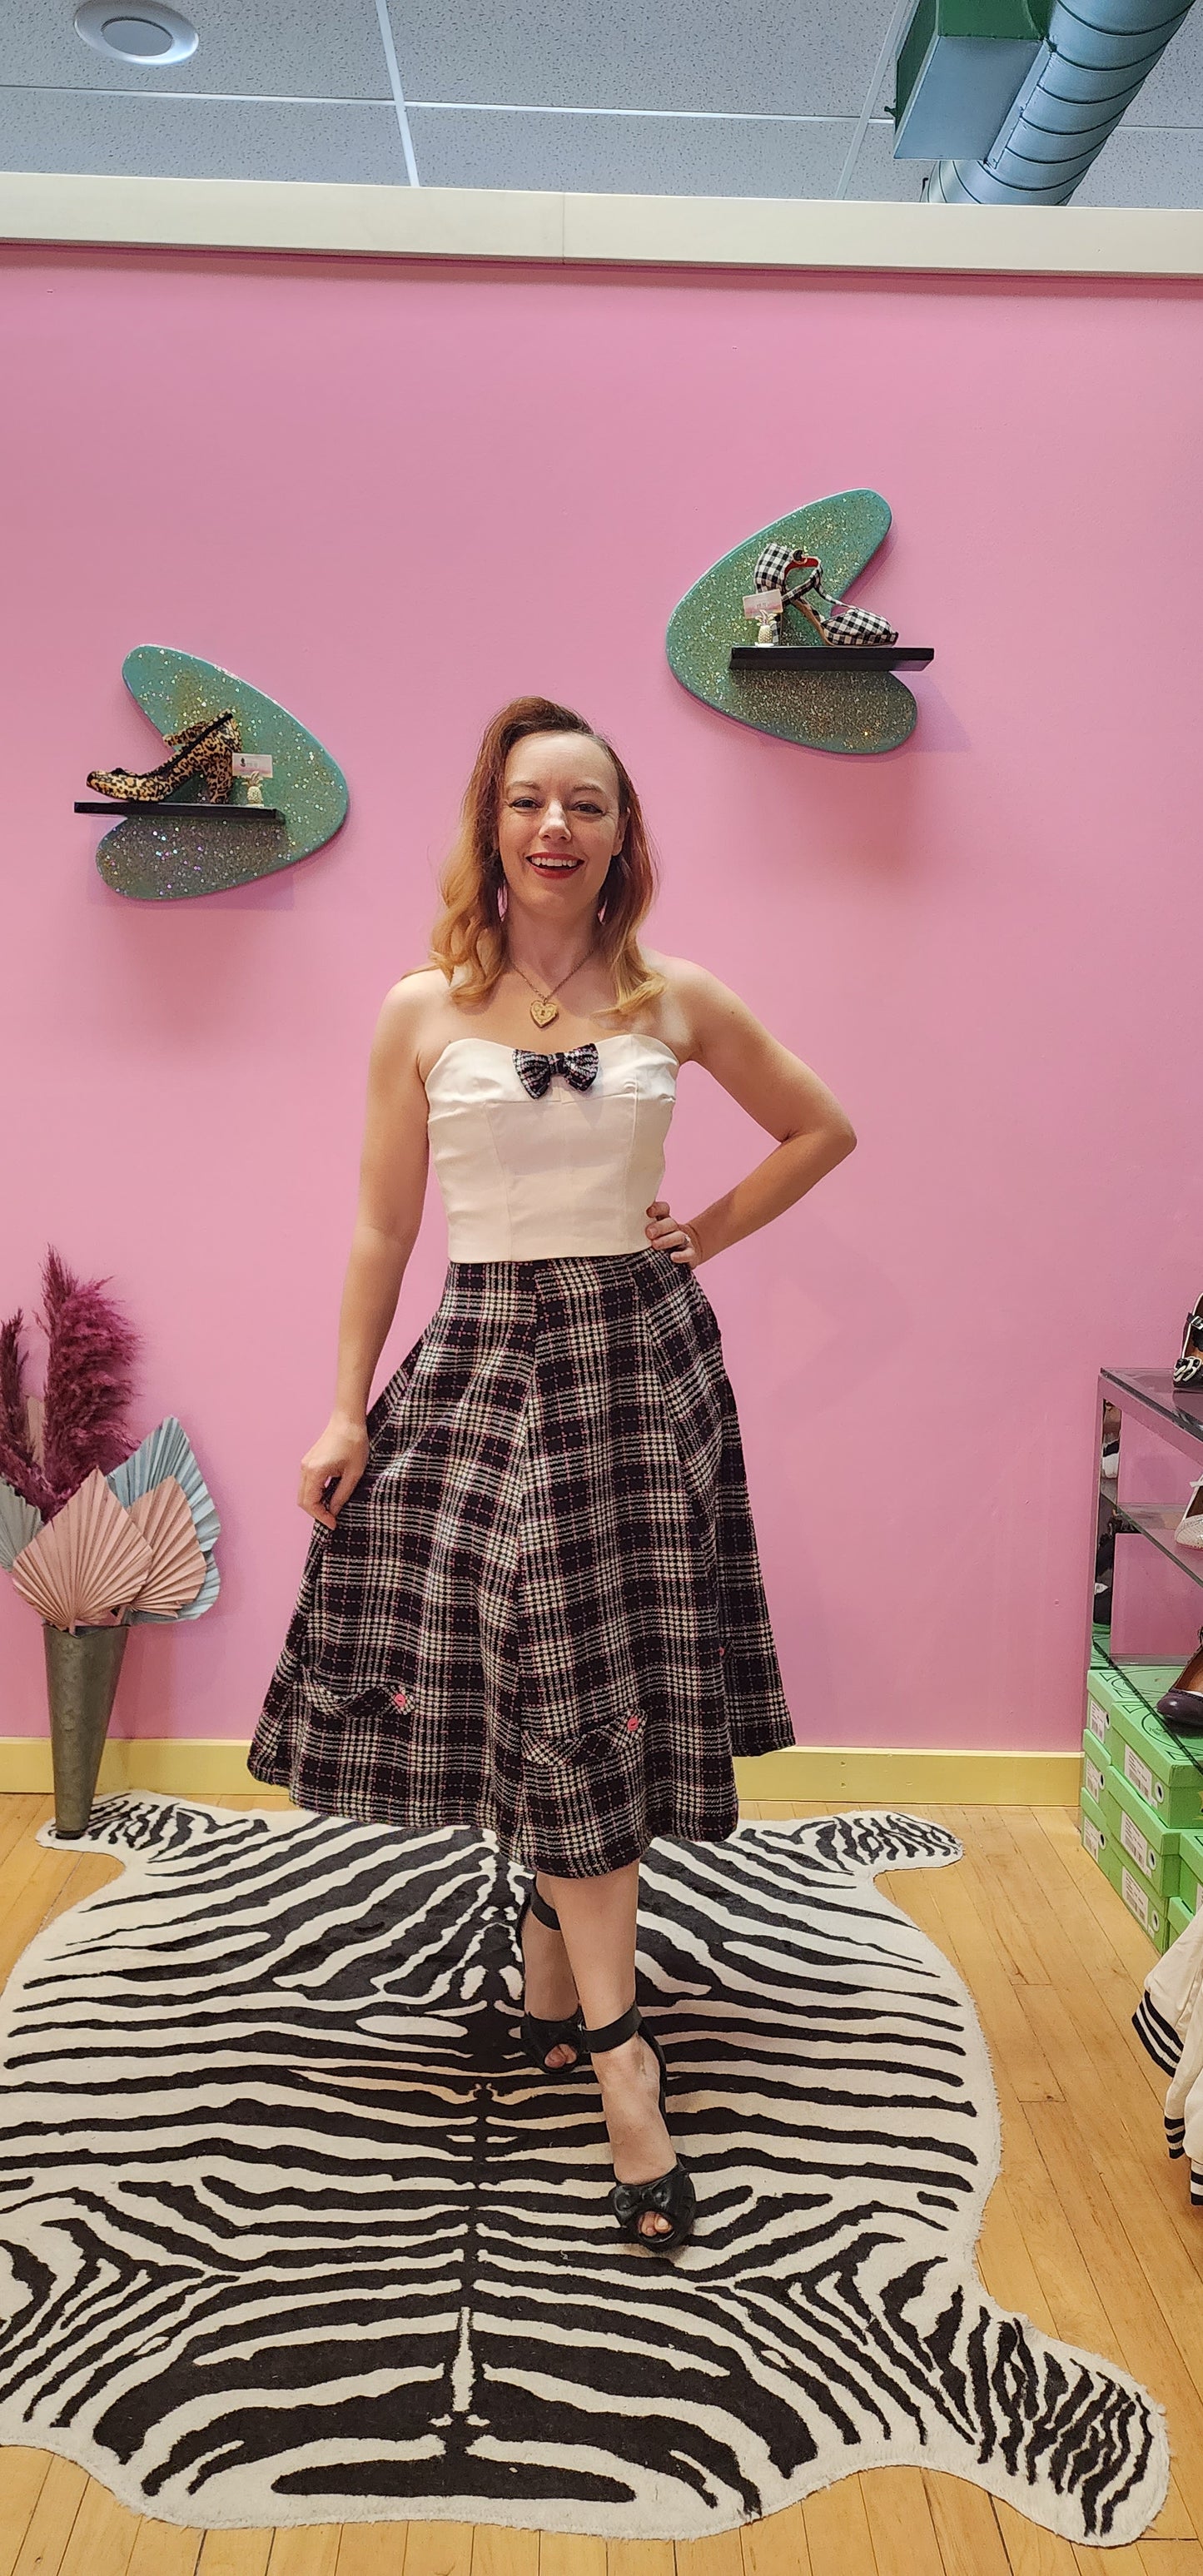 Top and Skirt Two-Piece Outfit by Neon Plum Pinup Clothing